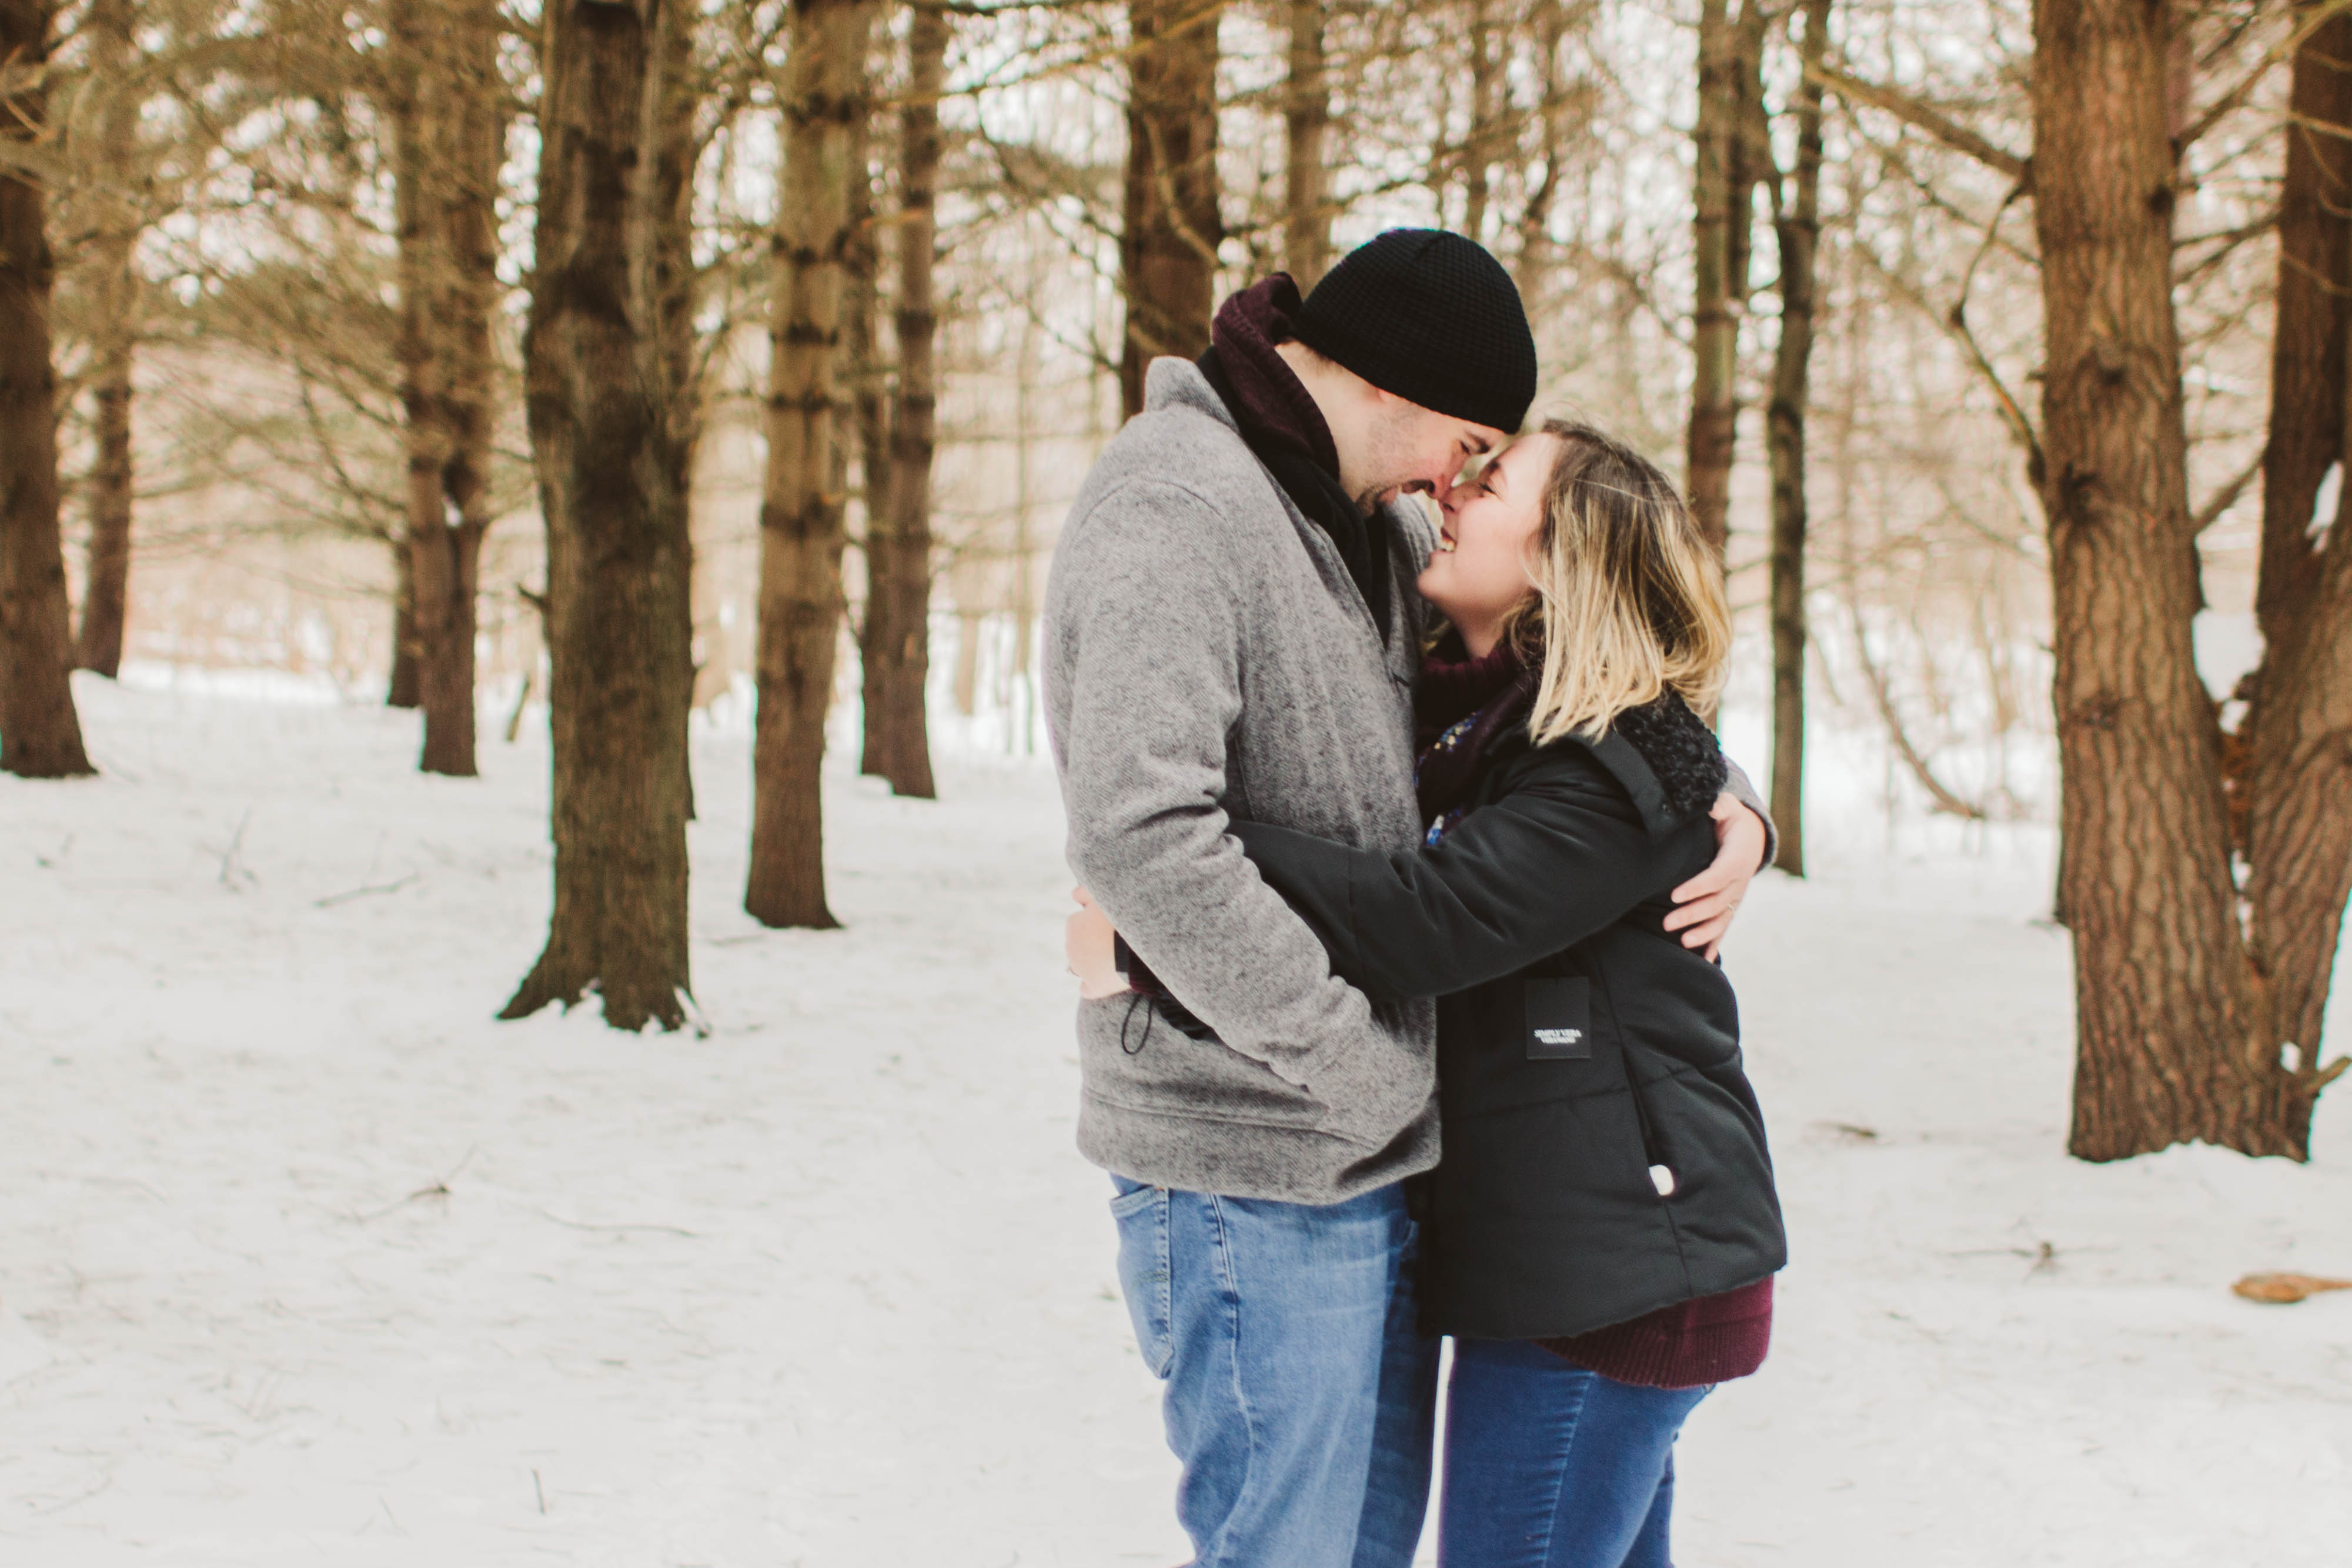 Snowy couple's session at Chippewa Nature Center in Midland Michigan.